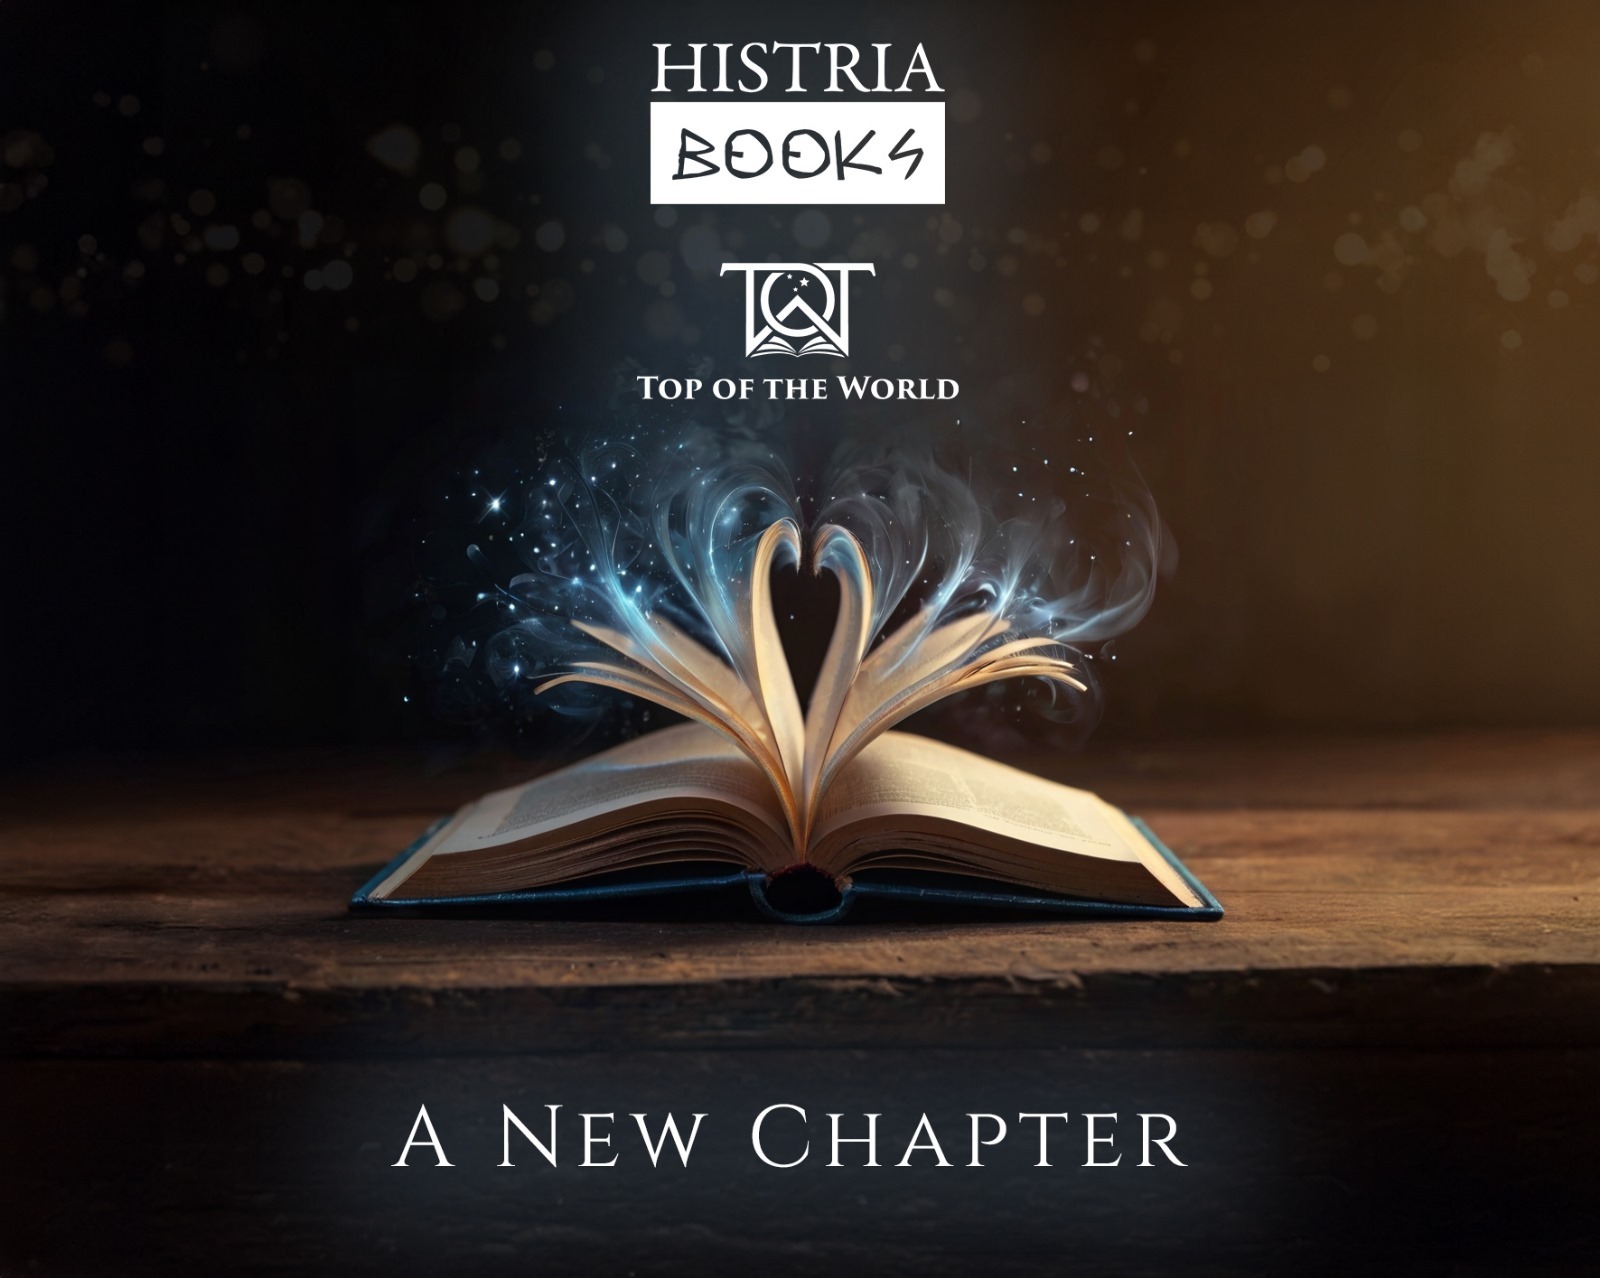 Histria Books Acquires Top of the World Publishing